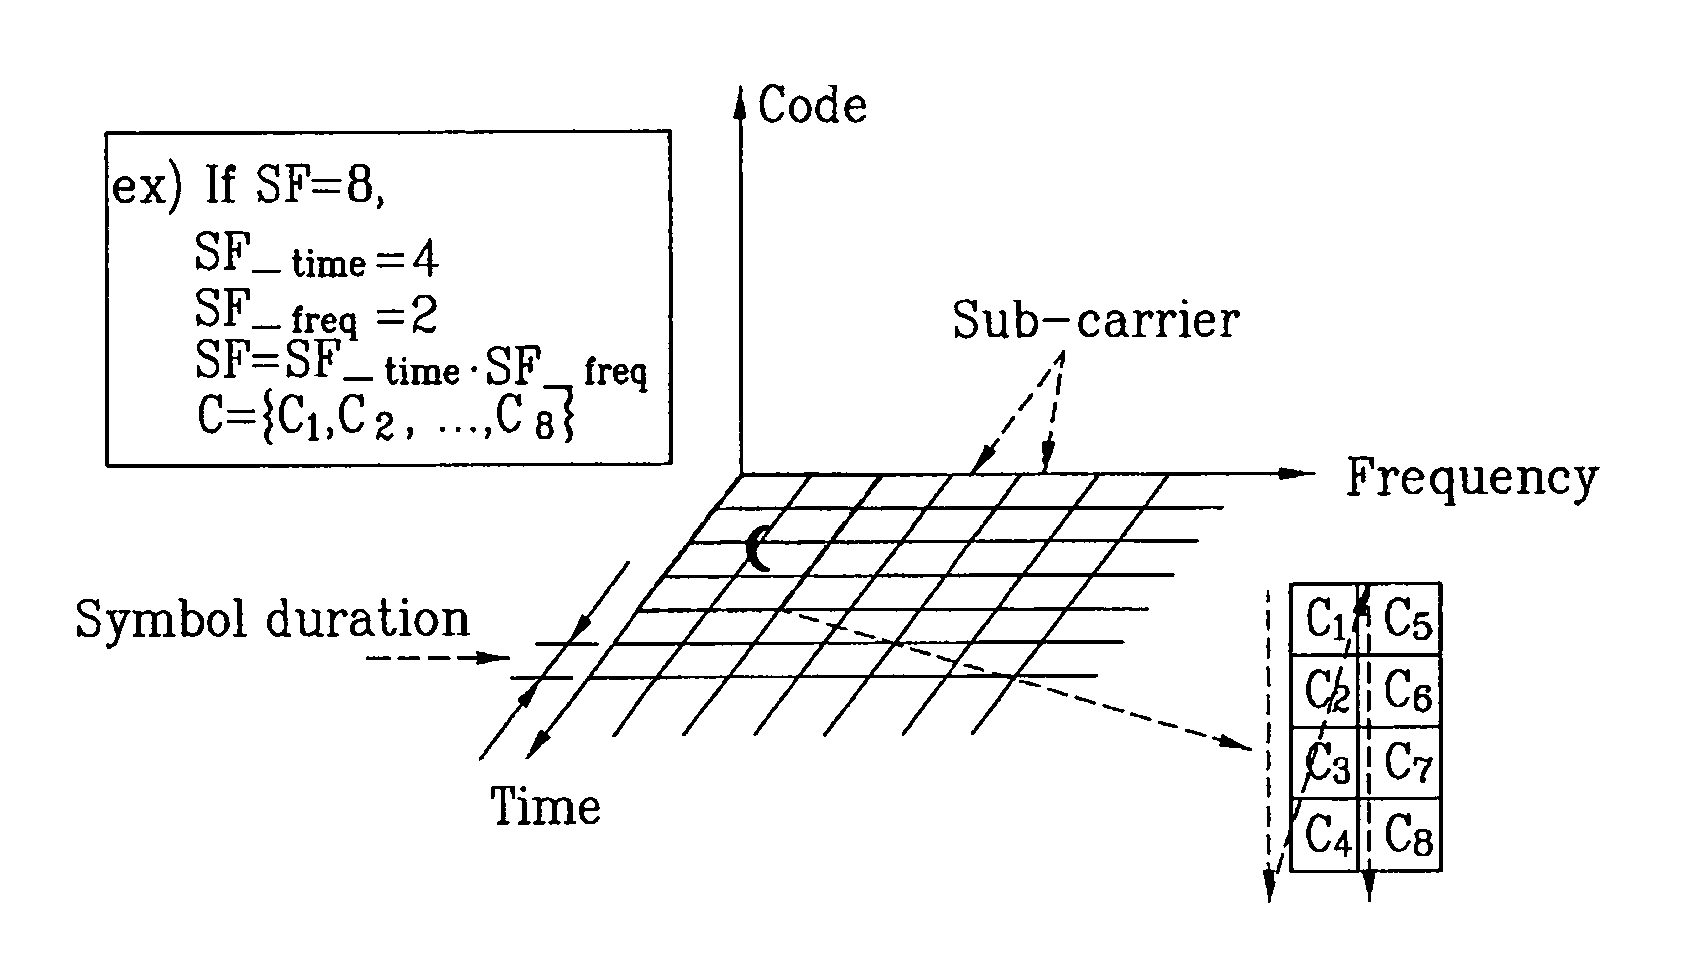 Wireless multiple access system for suppressing inter-cell interference